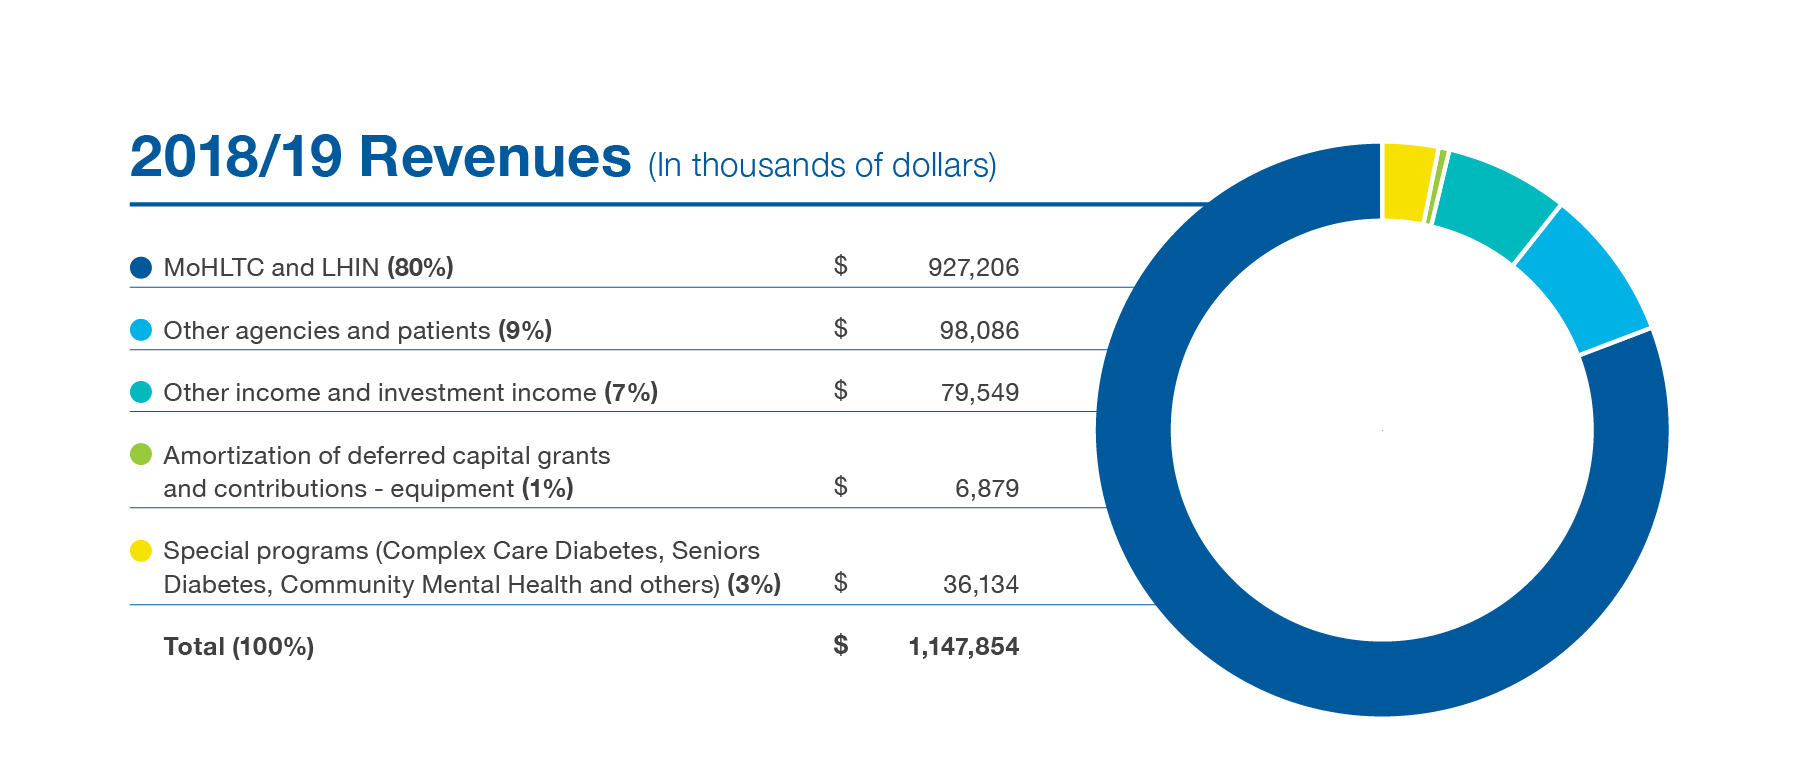 2018/19 Revenues (in thousands of dollars): MoHLTC and LHIN (80%) $927,206. Other Agencies and patients (9%) $98,086. Other income and investment income (7%) $79,549. Amortization of deferred capital grants and contributions – equipment (1%) $6,879. Special programs (Complex Care Diabetes, Seniors Diabetes, Community Mental Health and others) (3%) $36,134. TOTAL (100%) $1,147,854